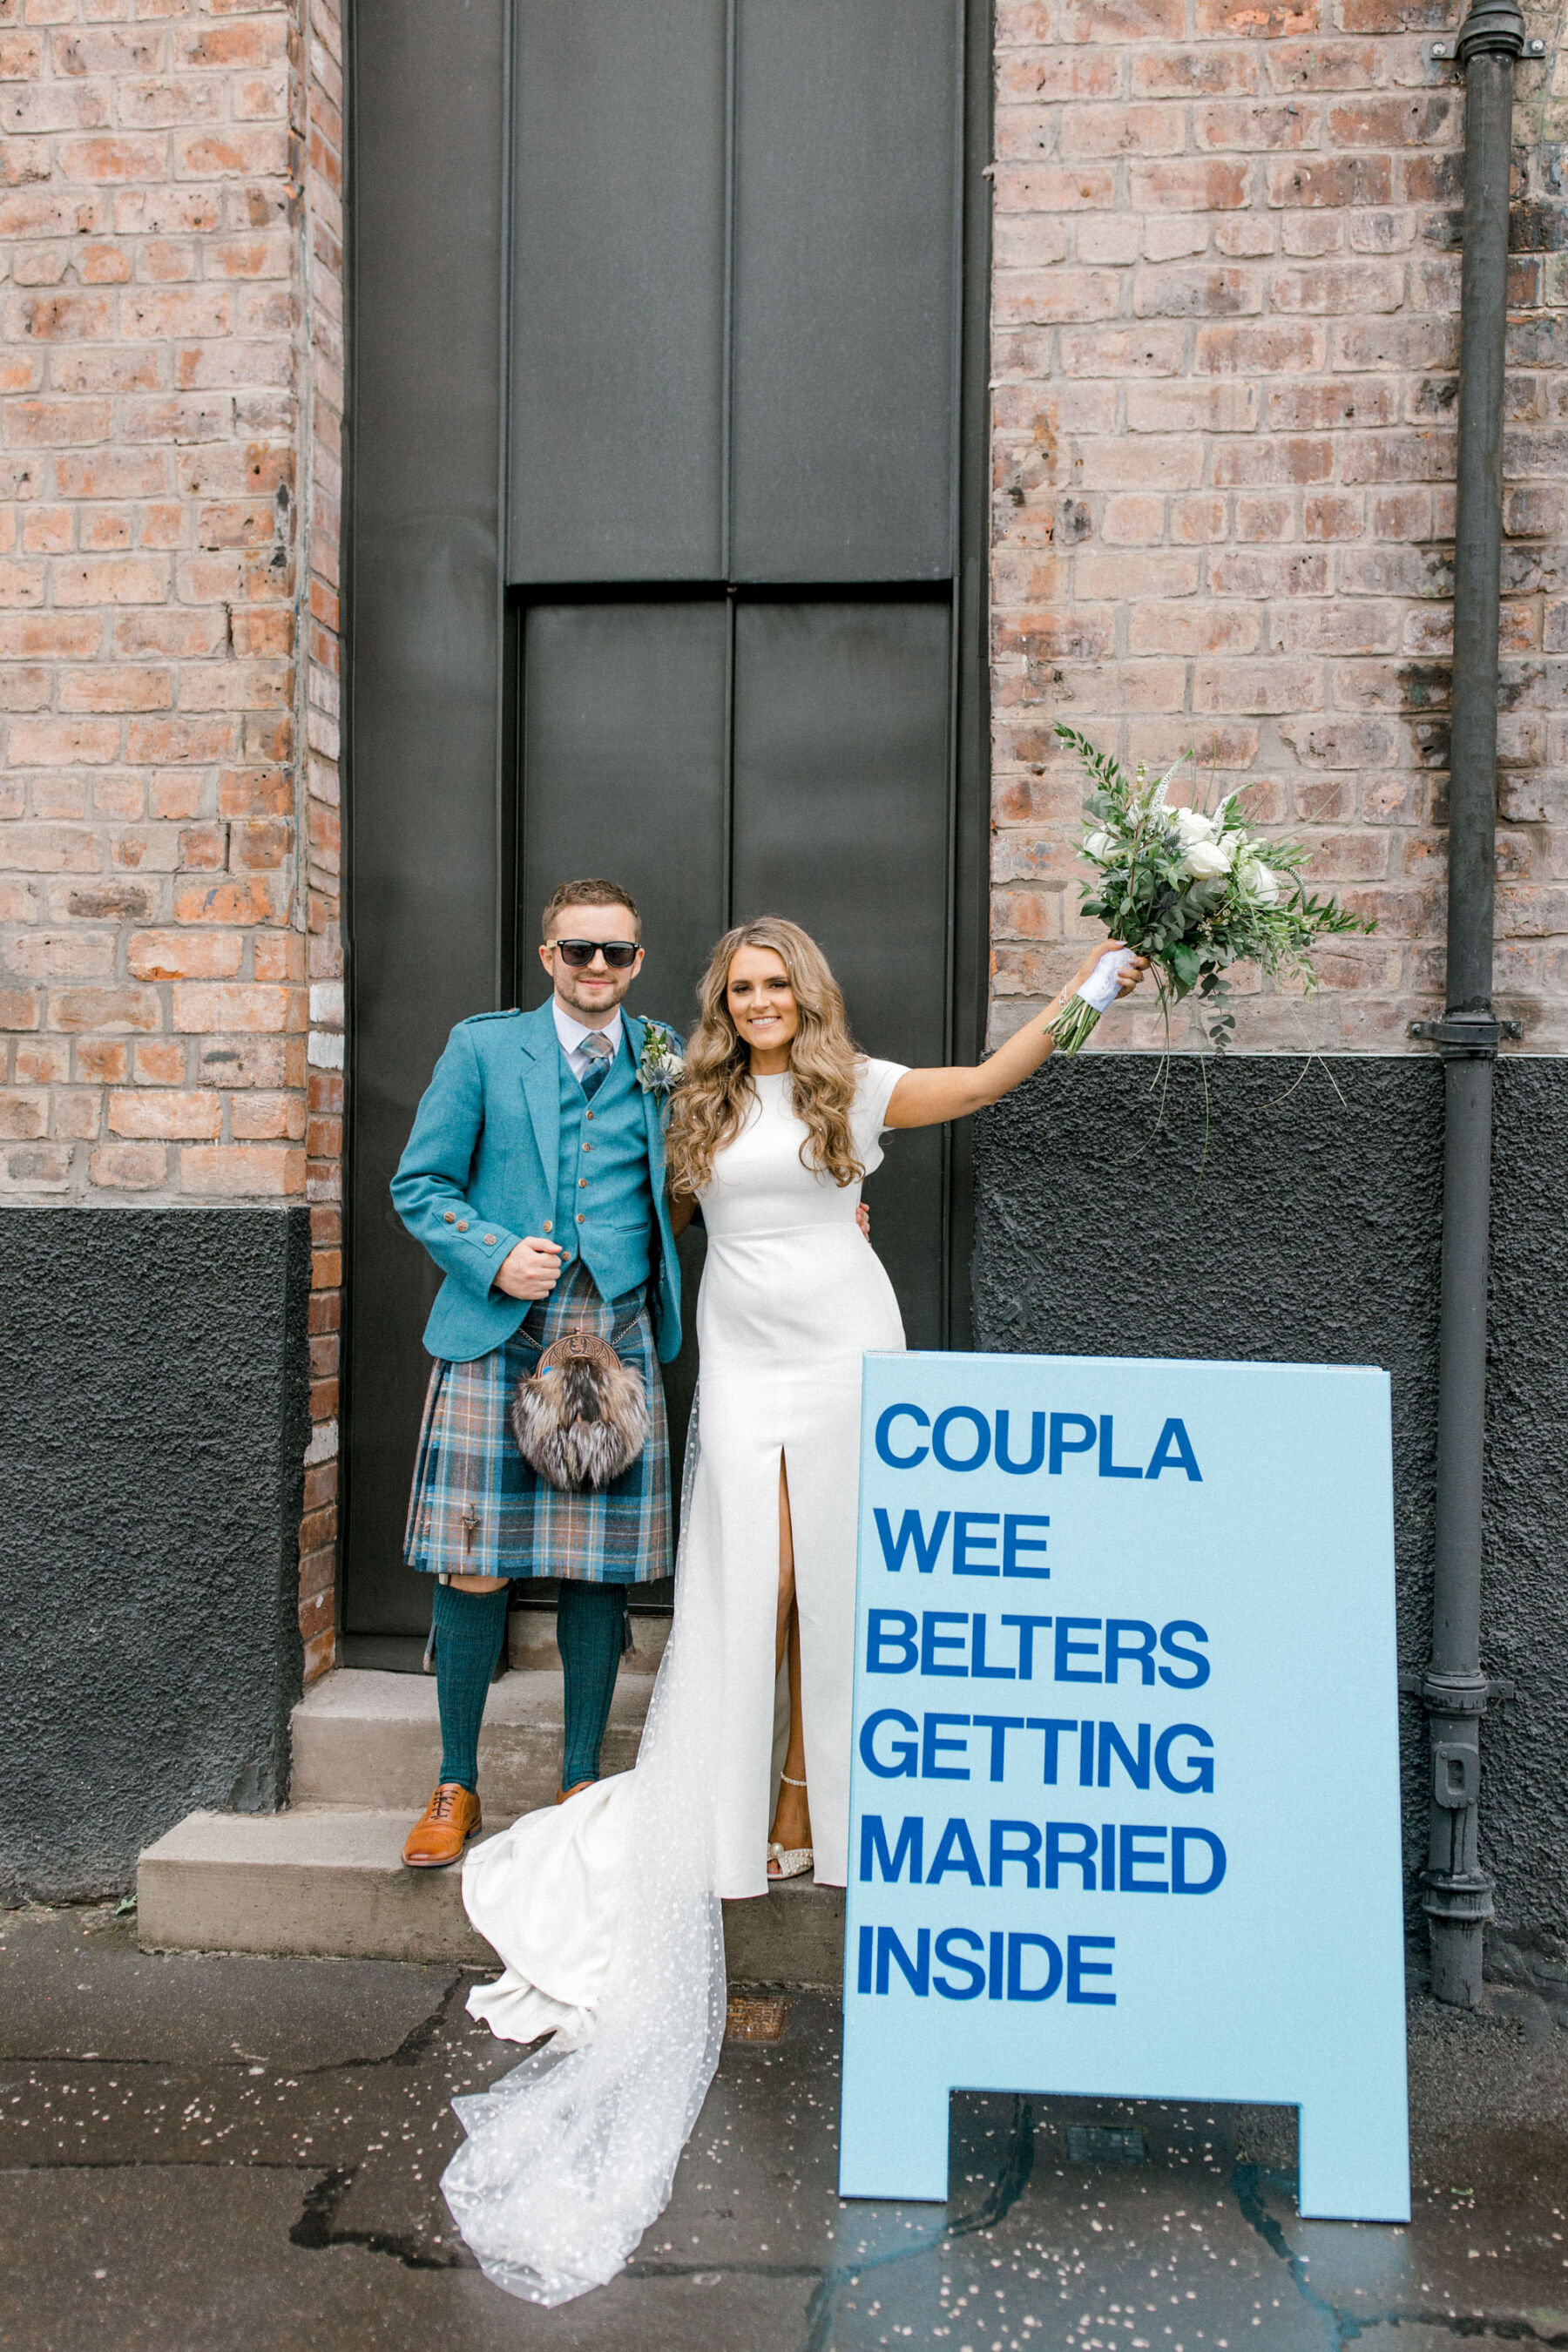 Coupla wee belters - wedding sign